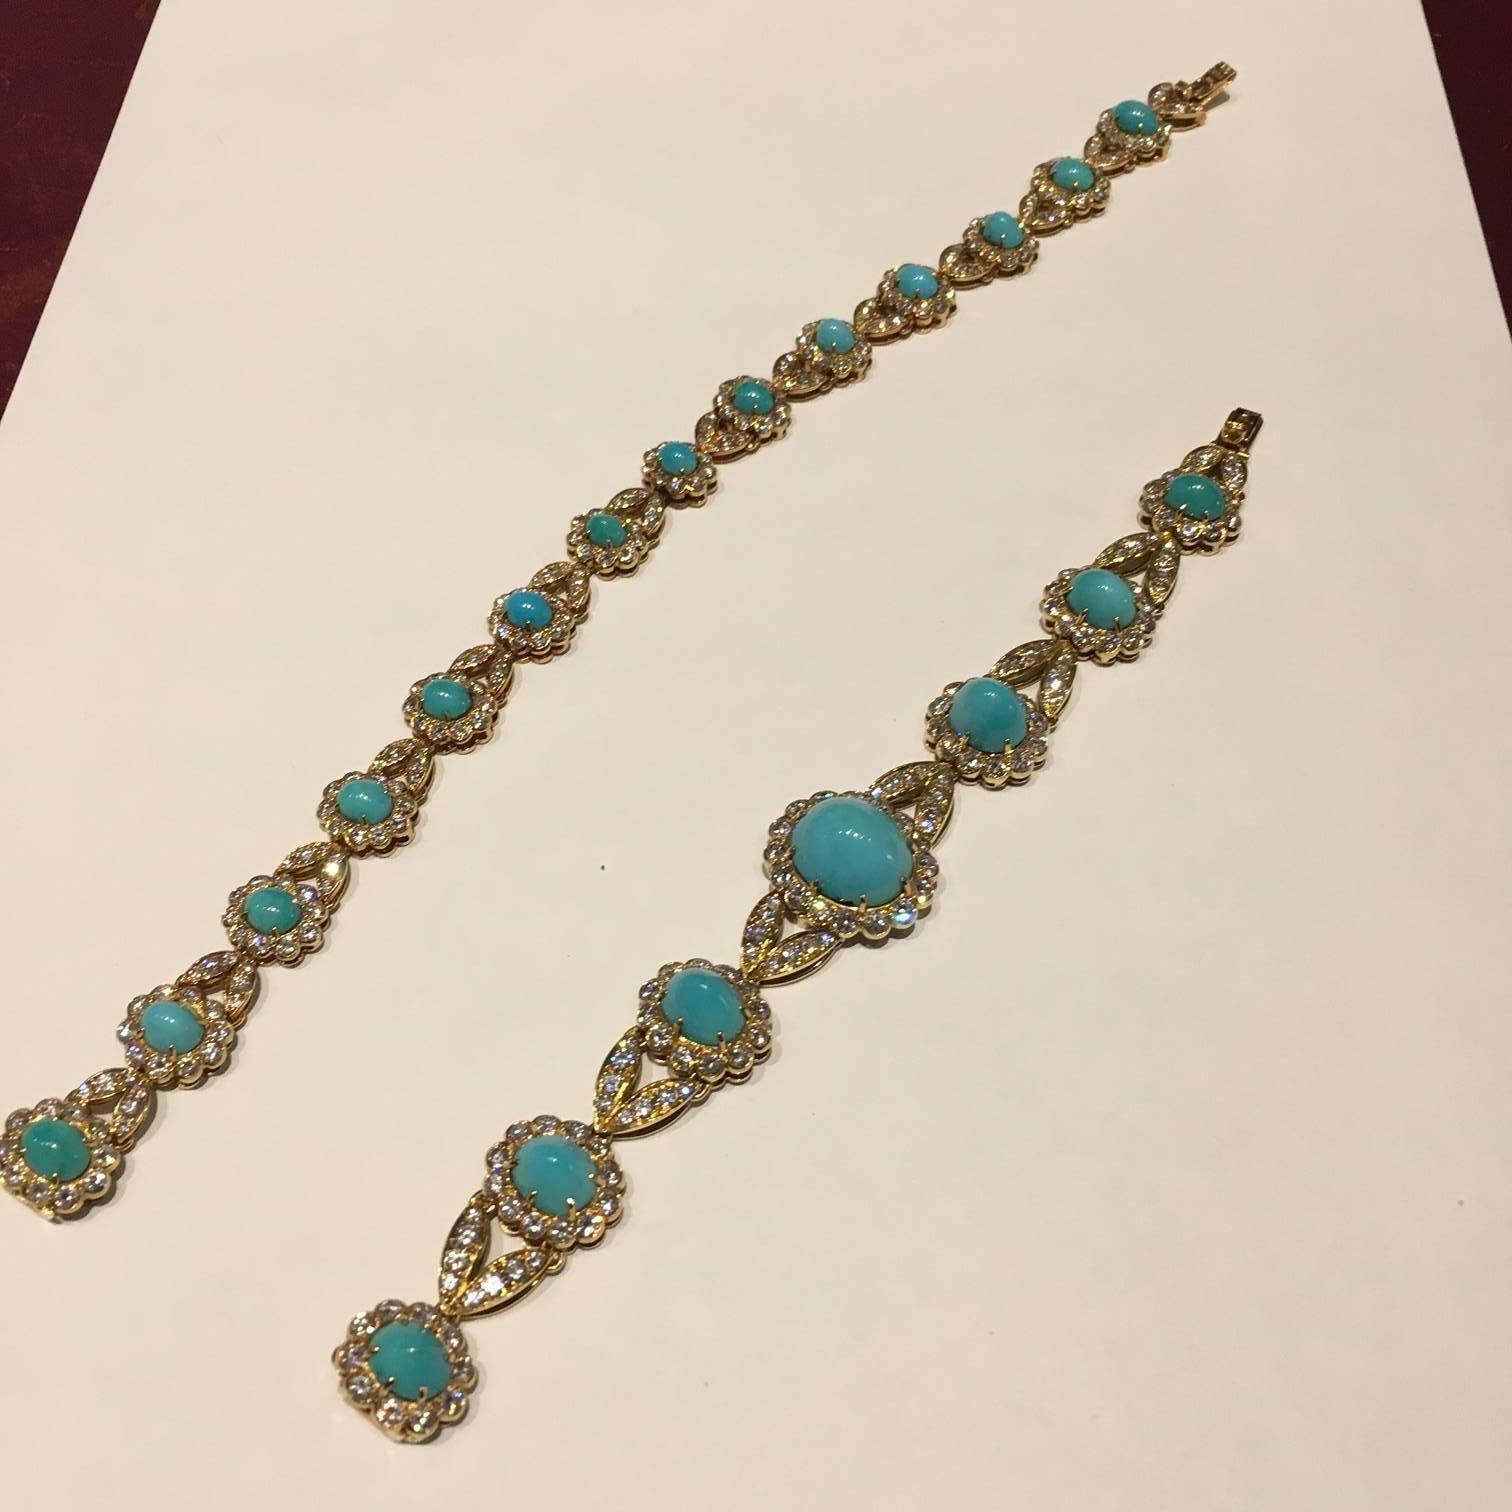 An important and iconic set by Van Cleef & Arpels, comprising necklace and ear-pendants, with fine Persian Turquoise and diamonds. The necklace is detachable to be worn as a bracelet. Made in France, circa 1960s.